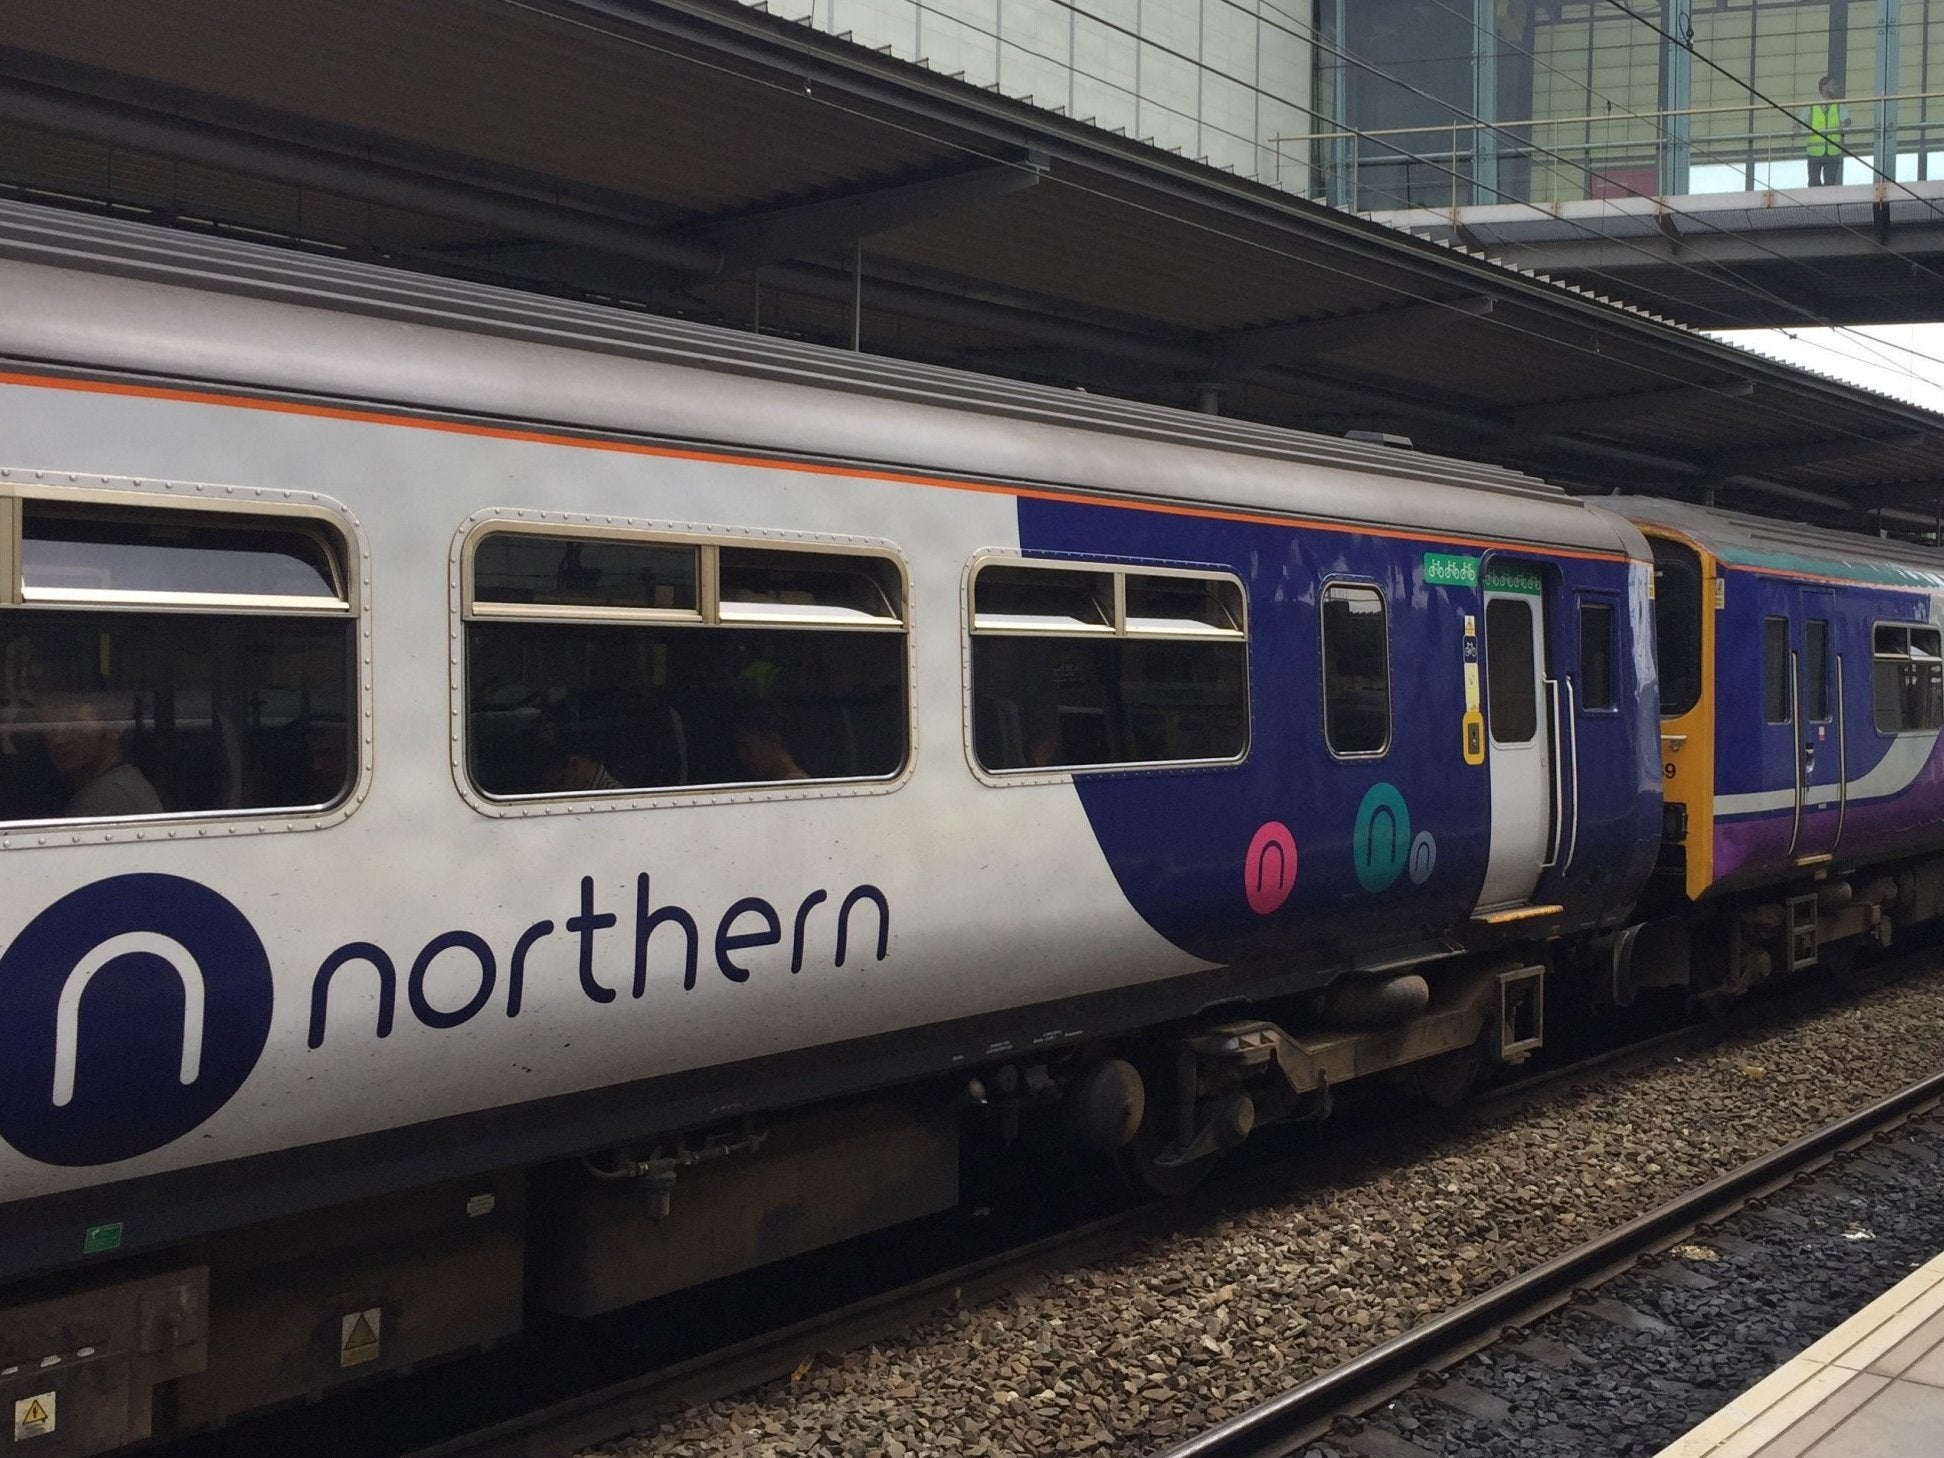 Northern rail passengers have coped with delays, disruption and cancellations after a timetable overhaul earlier this year